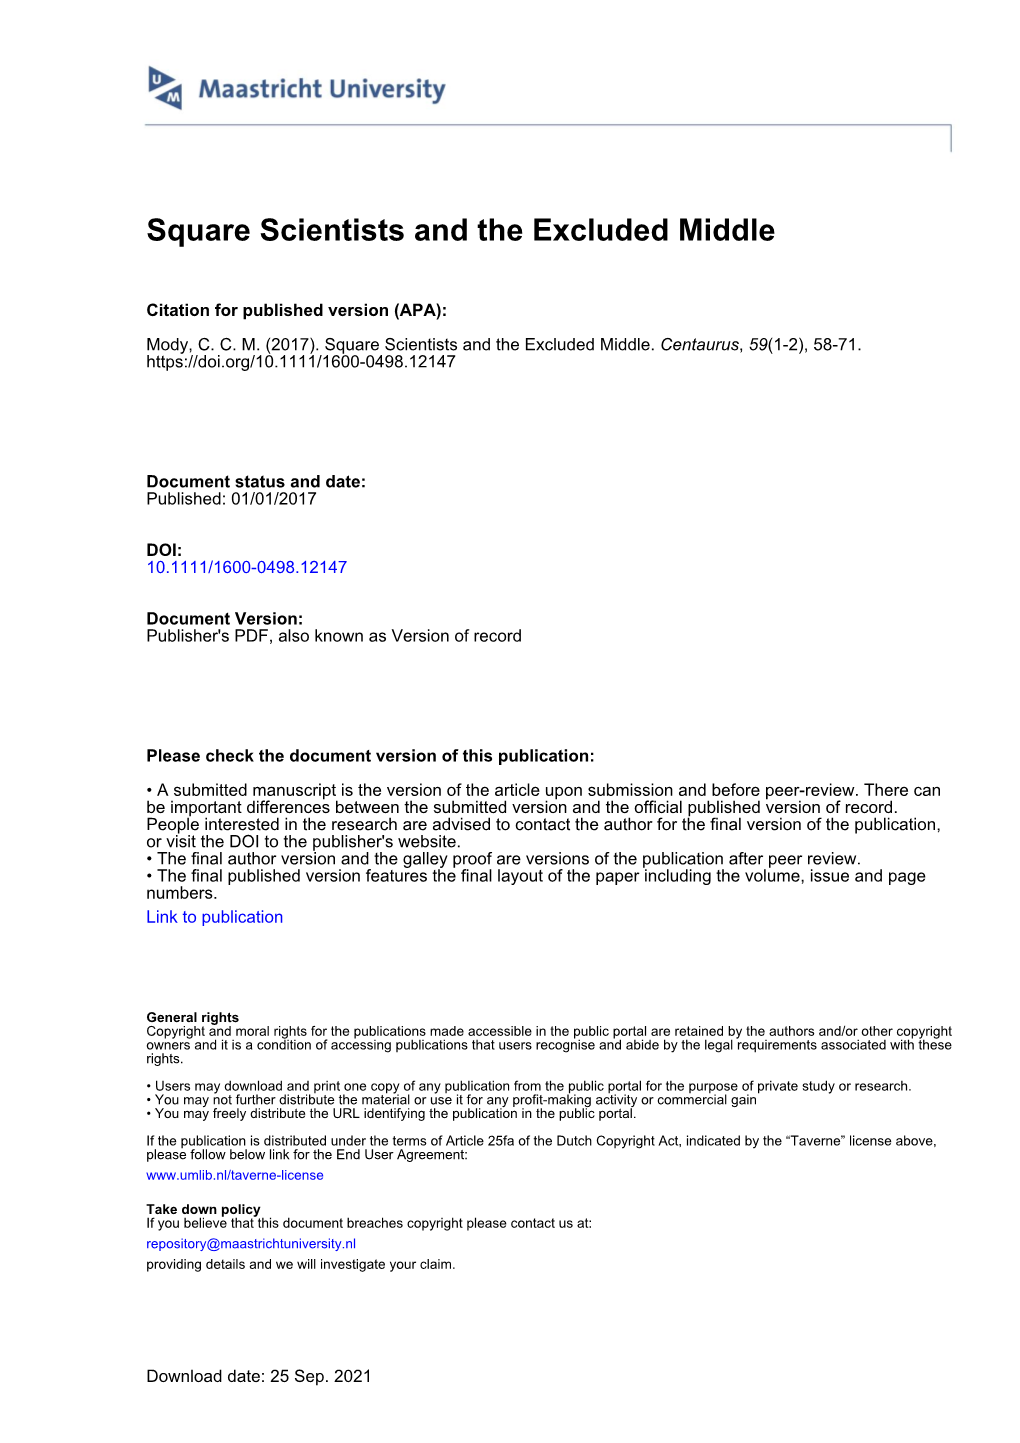 Square Scientists and the Excluded Middle